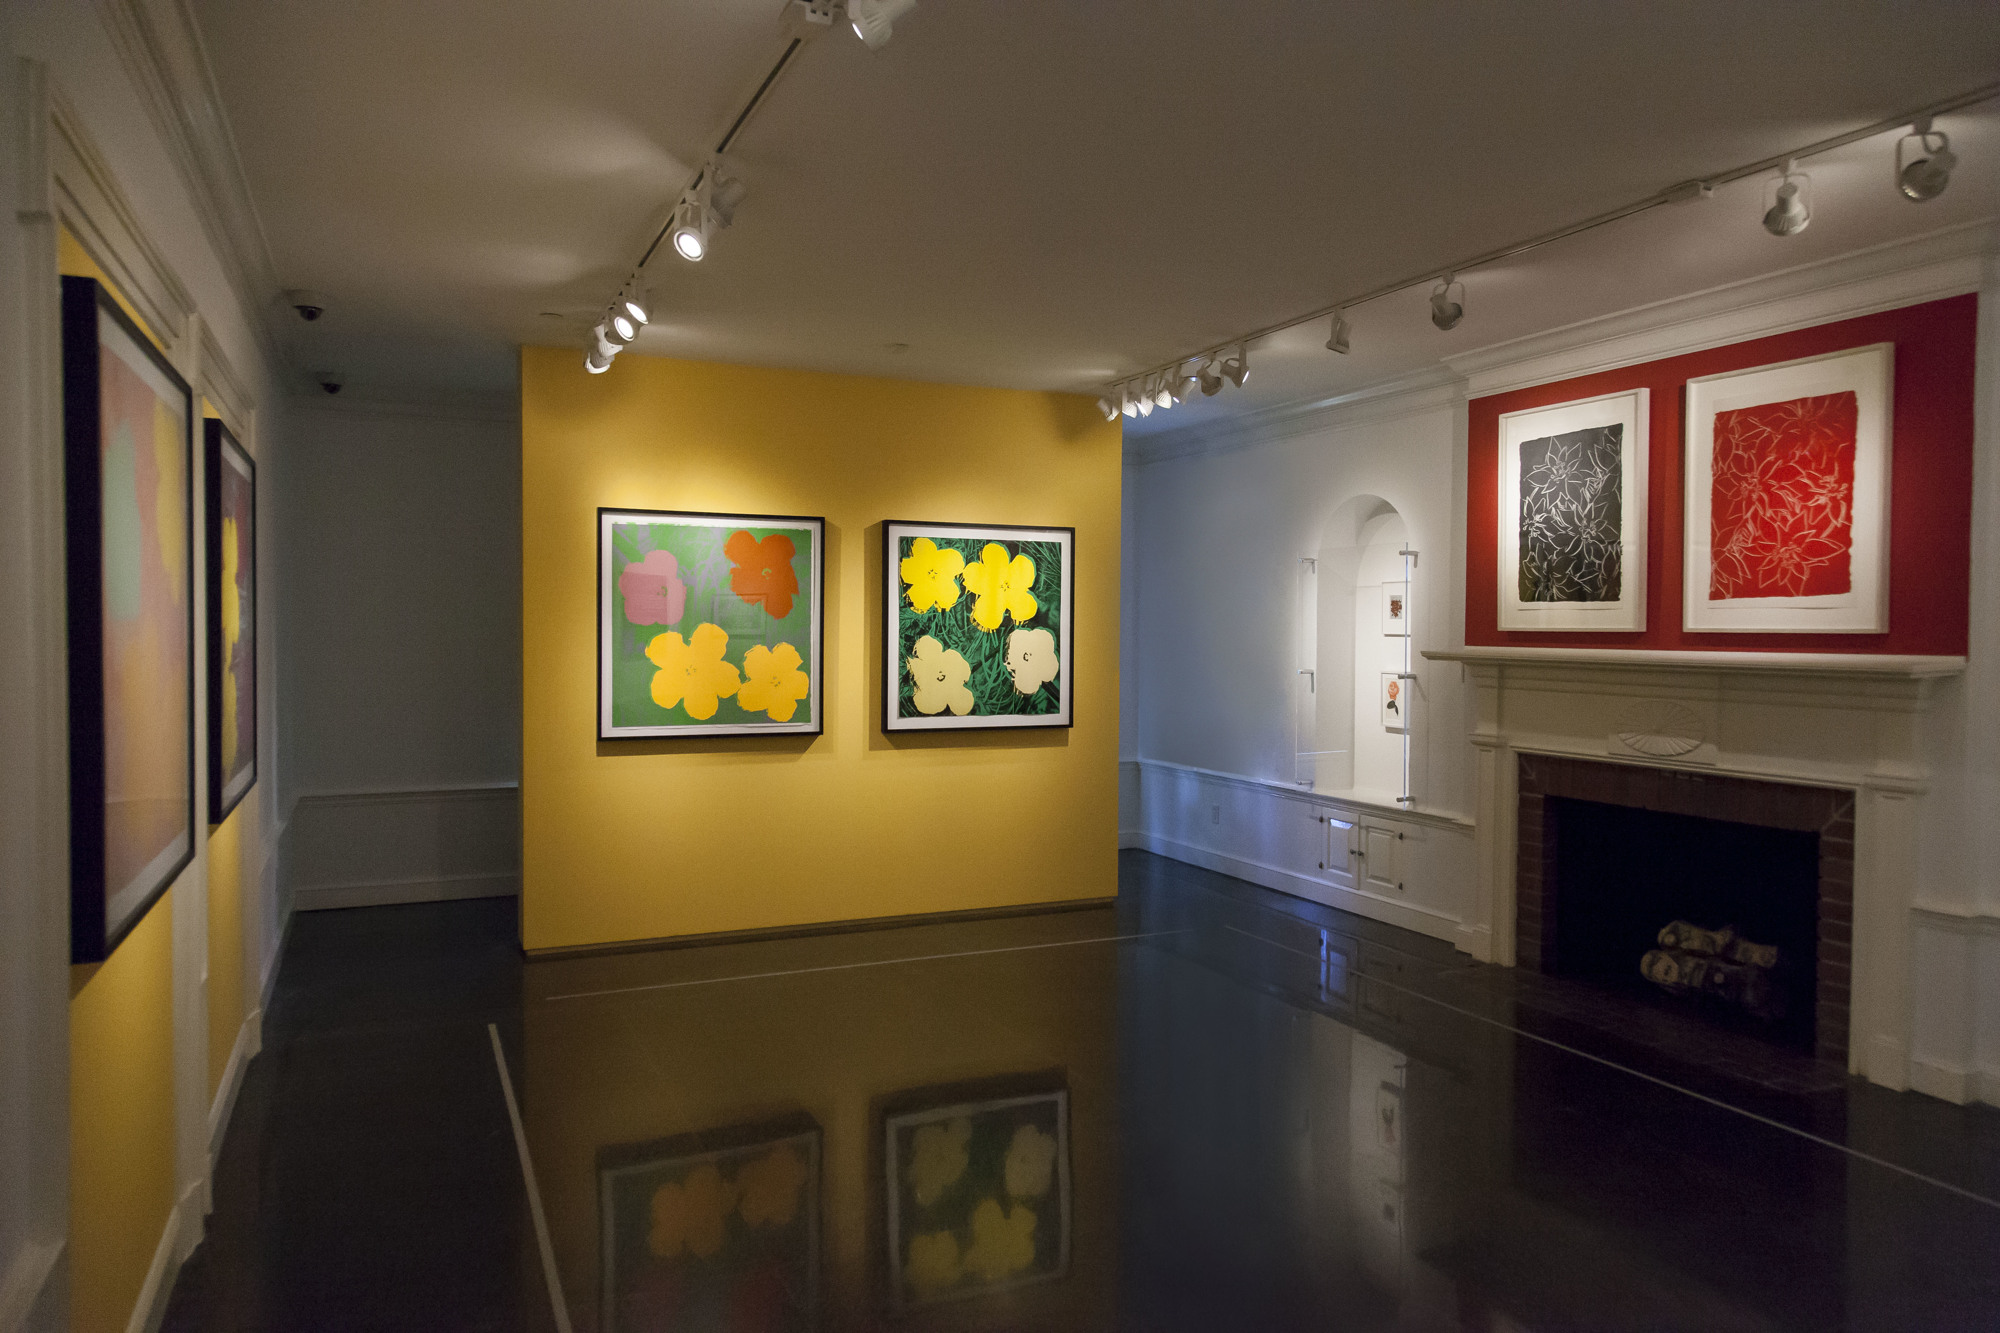 The north gallery features four silkscreen prints, as well as early and later works by the artist from the 1950s through 1980s that focus on floral imagery. Photo courtesy of Selby Gardens/Matthew Holler